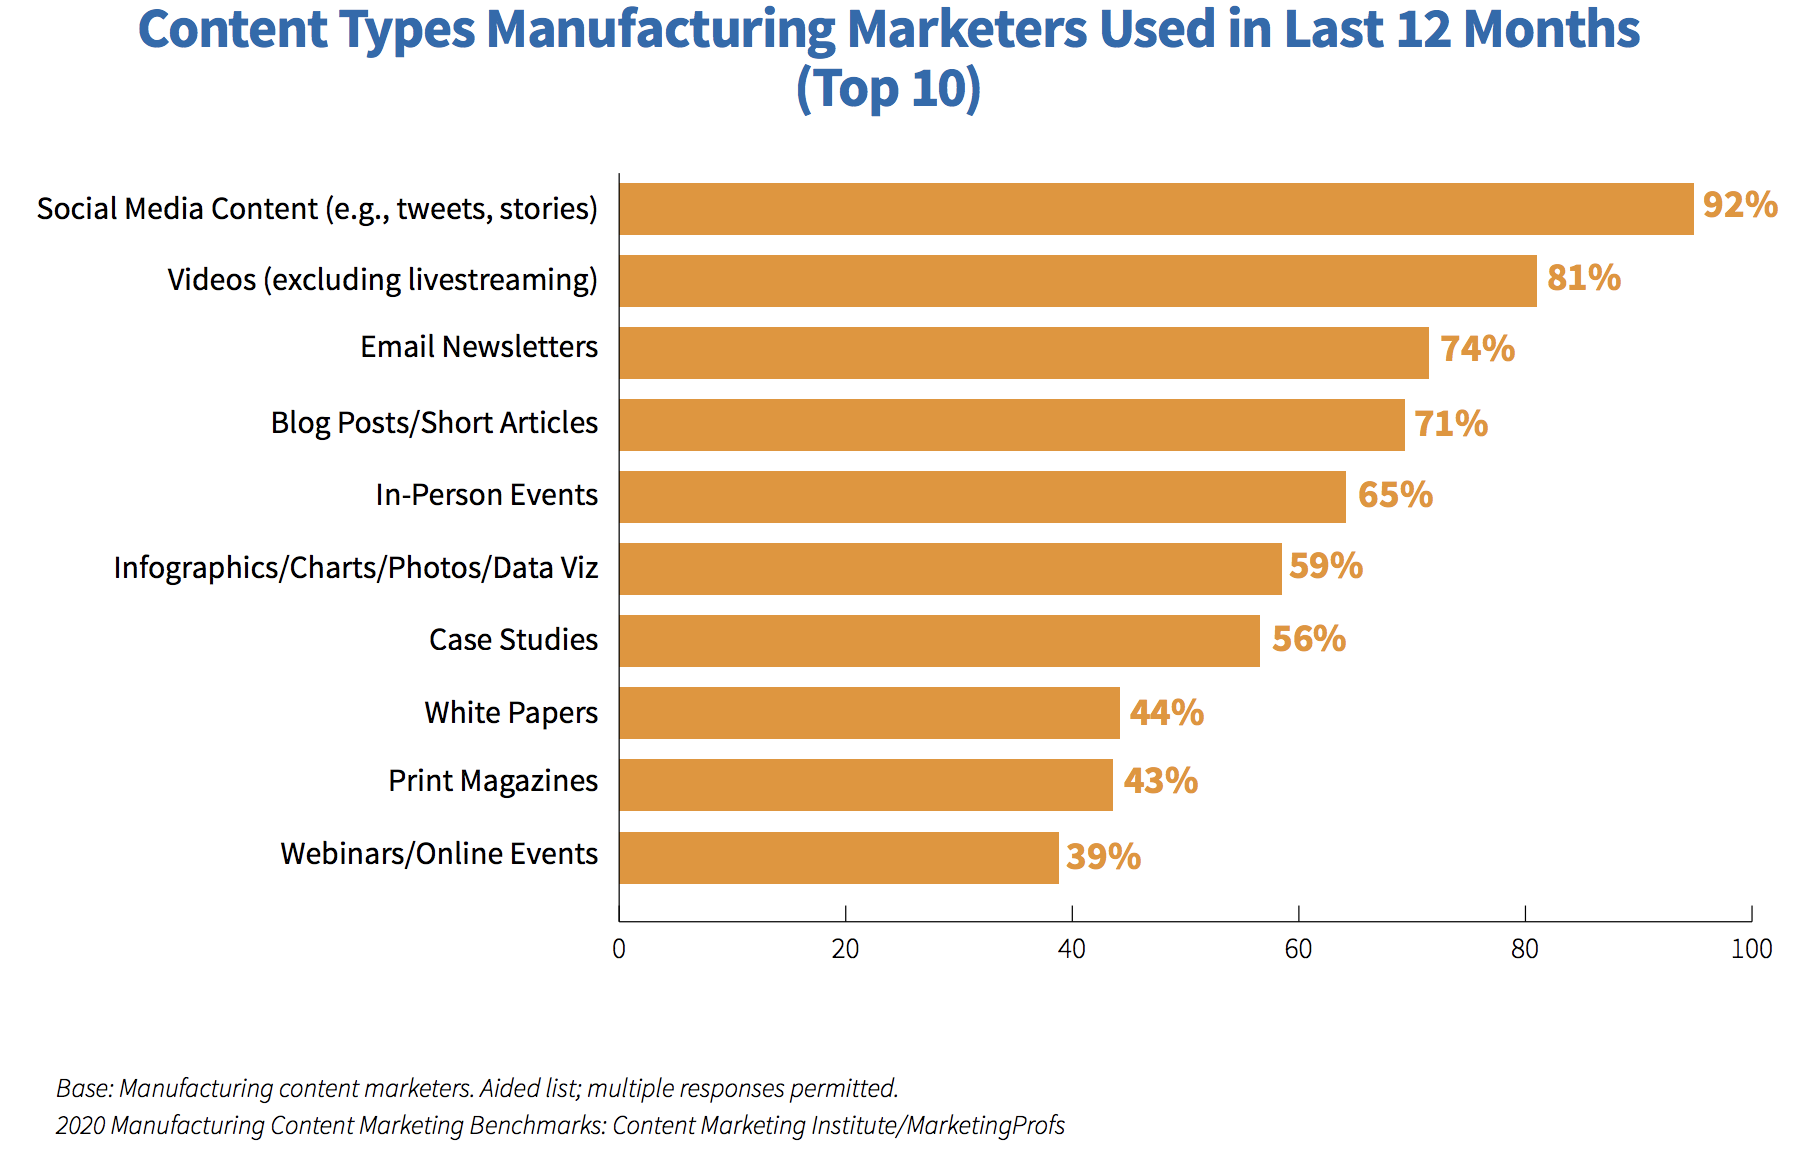 Content Types Manufacturing Marketers Used in the Past 12 Months